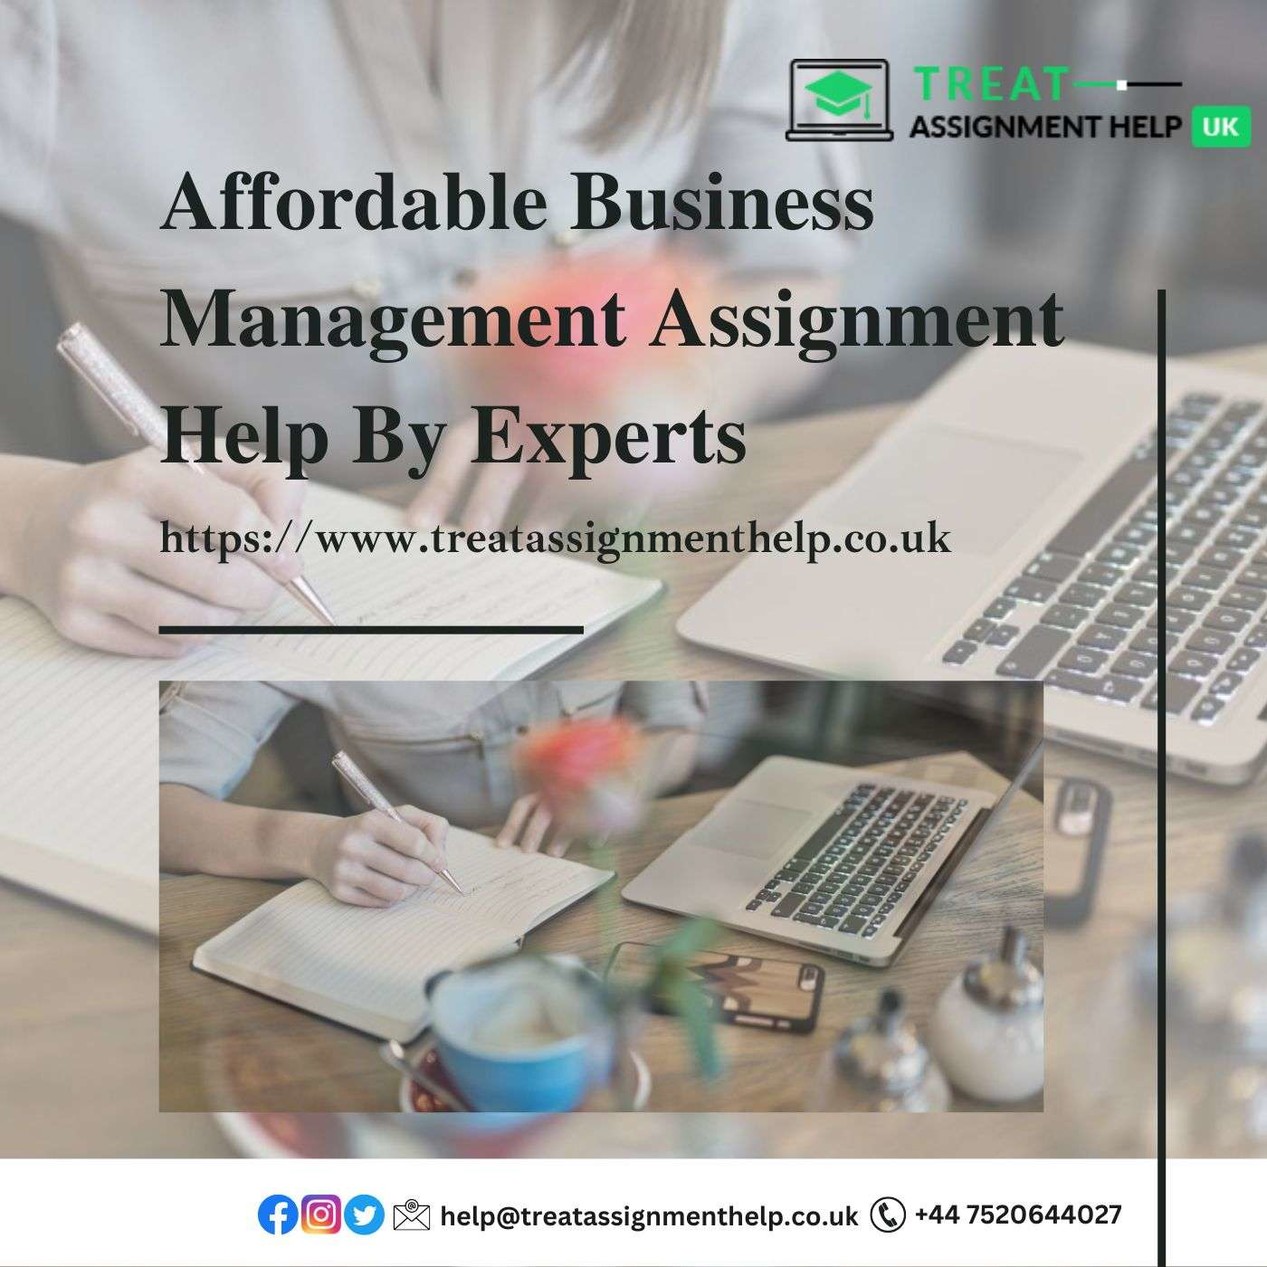 Affordable Business Management Assignment Help By Experts